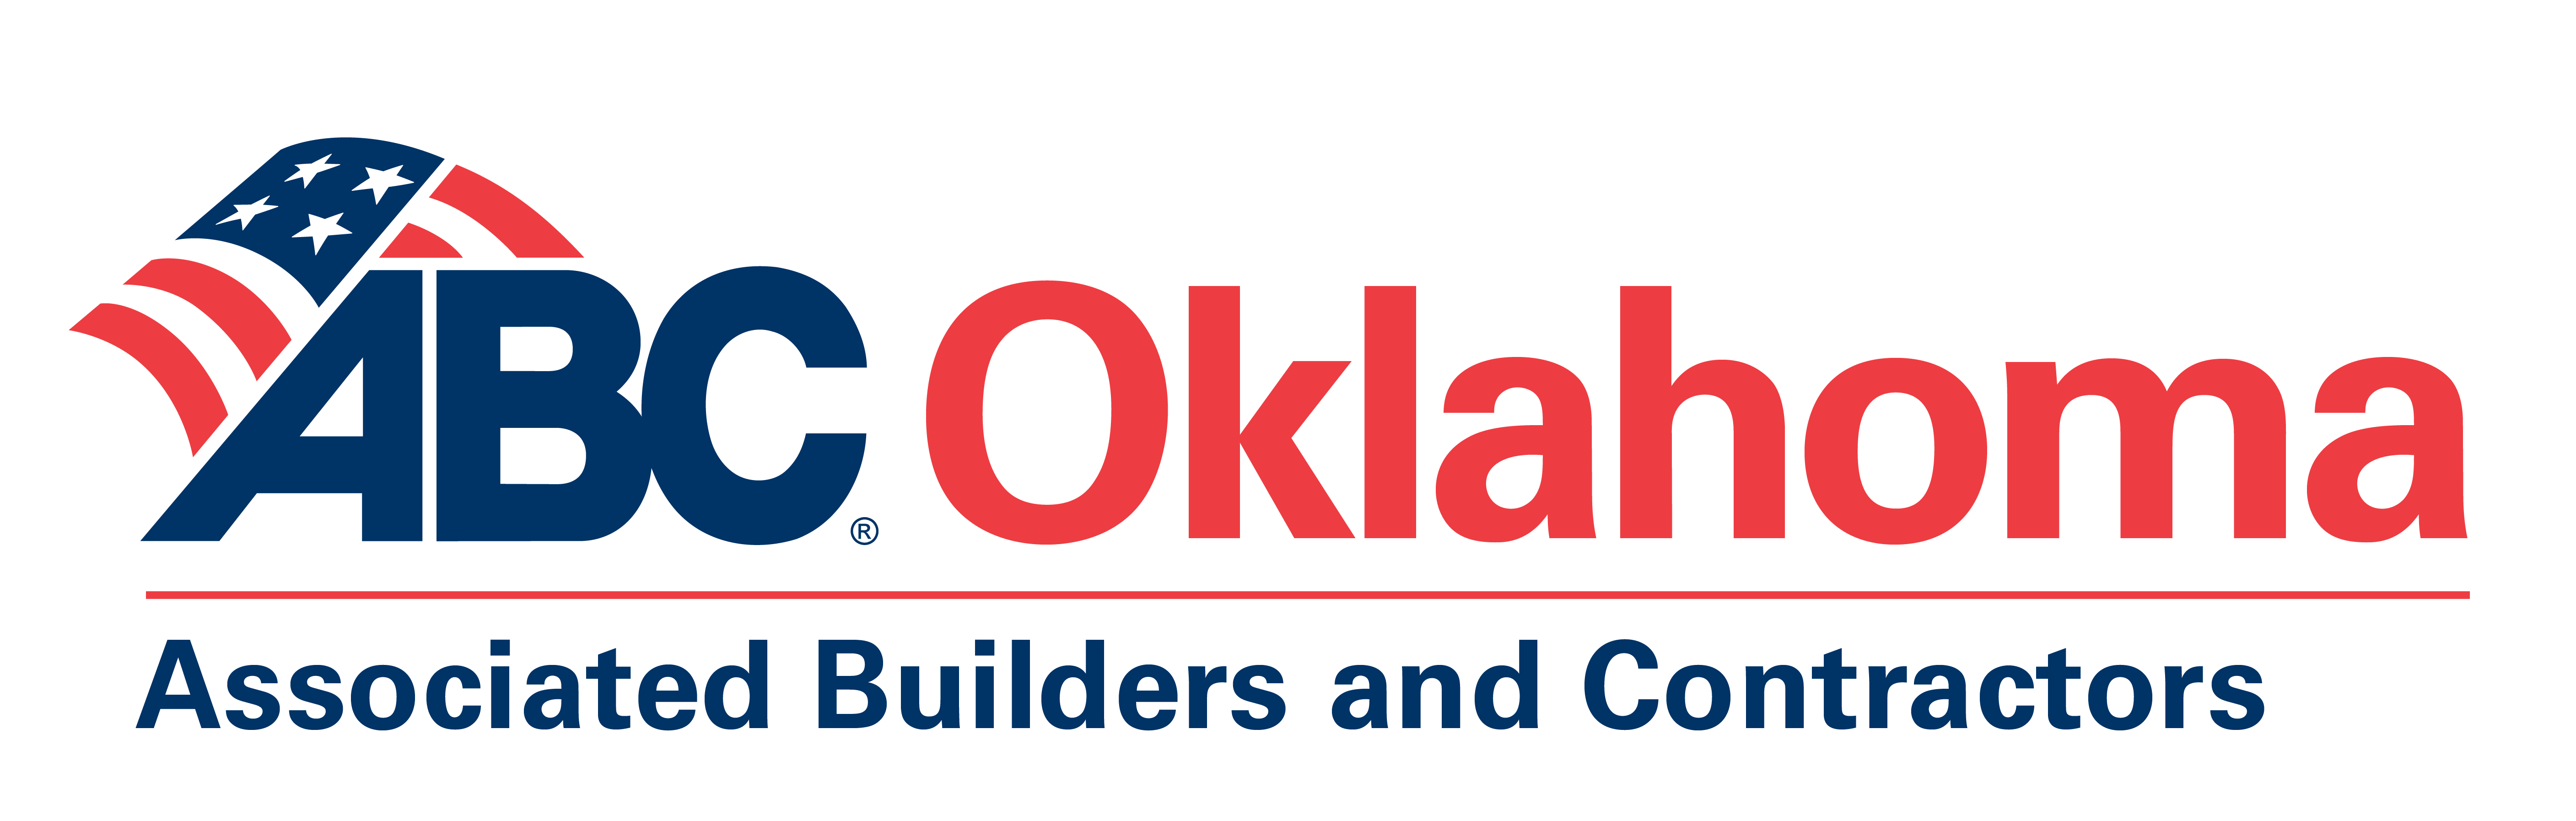 Associated Builders and Contractors, Inc. - Oklahoma Chapter